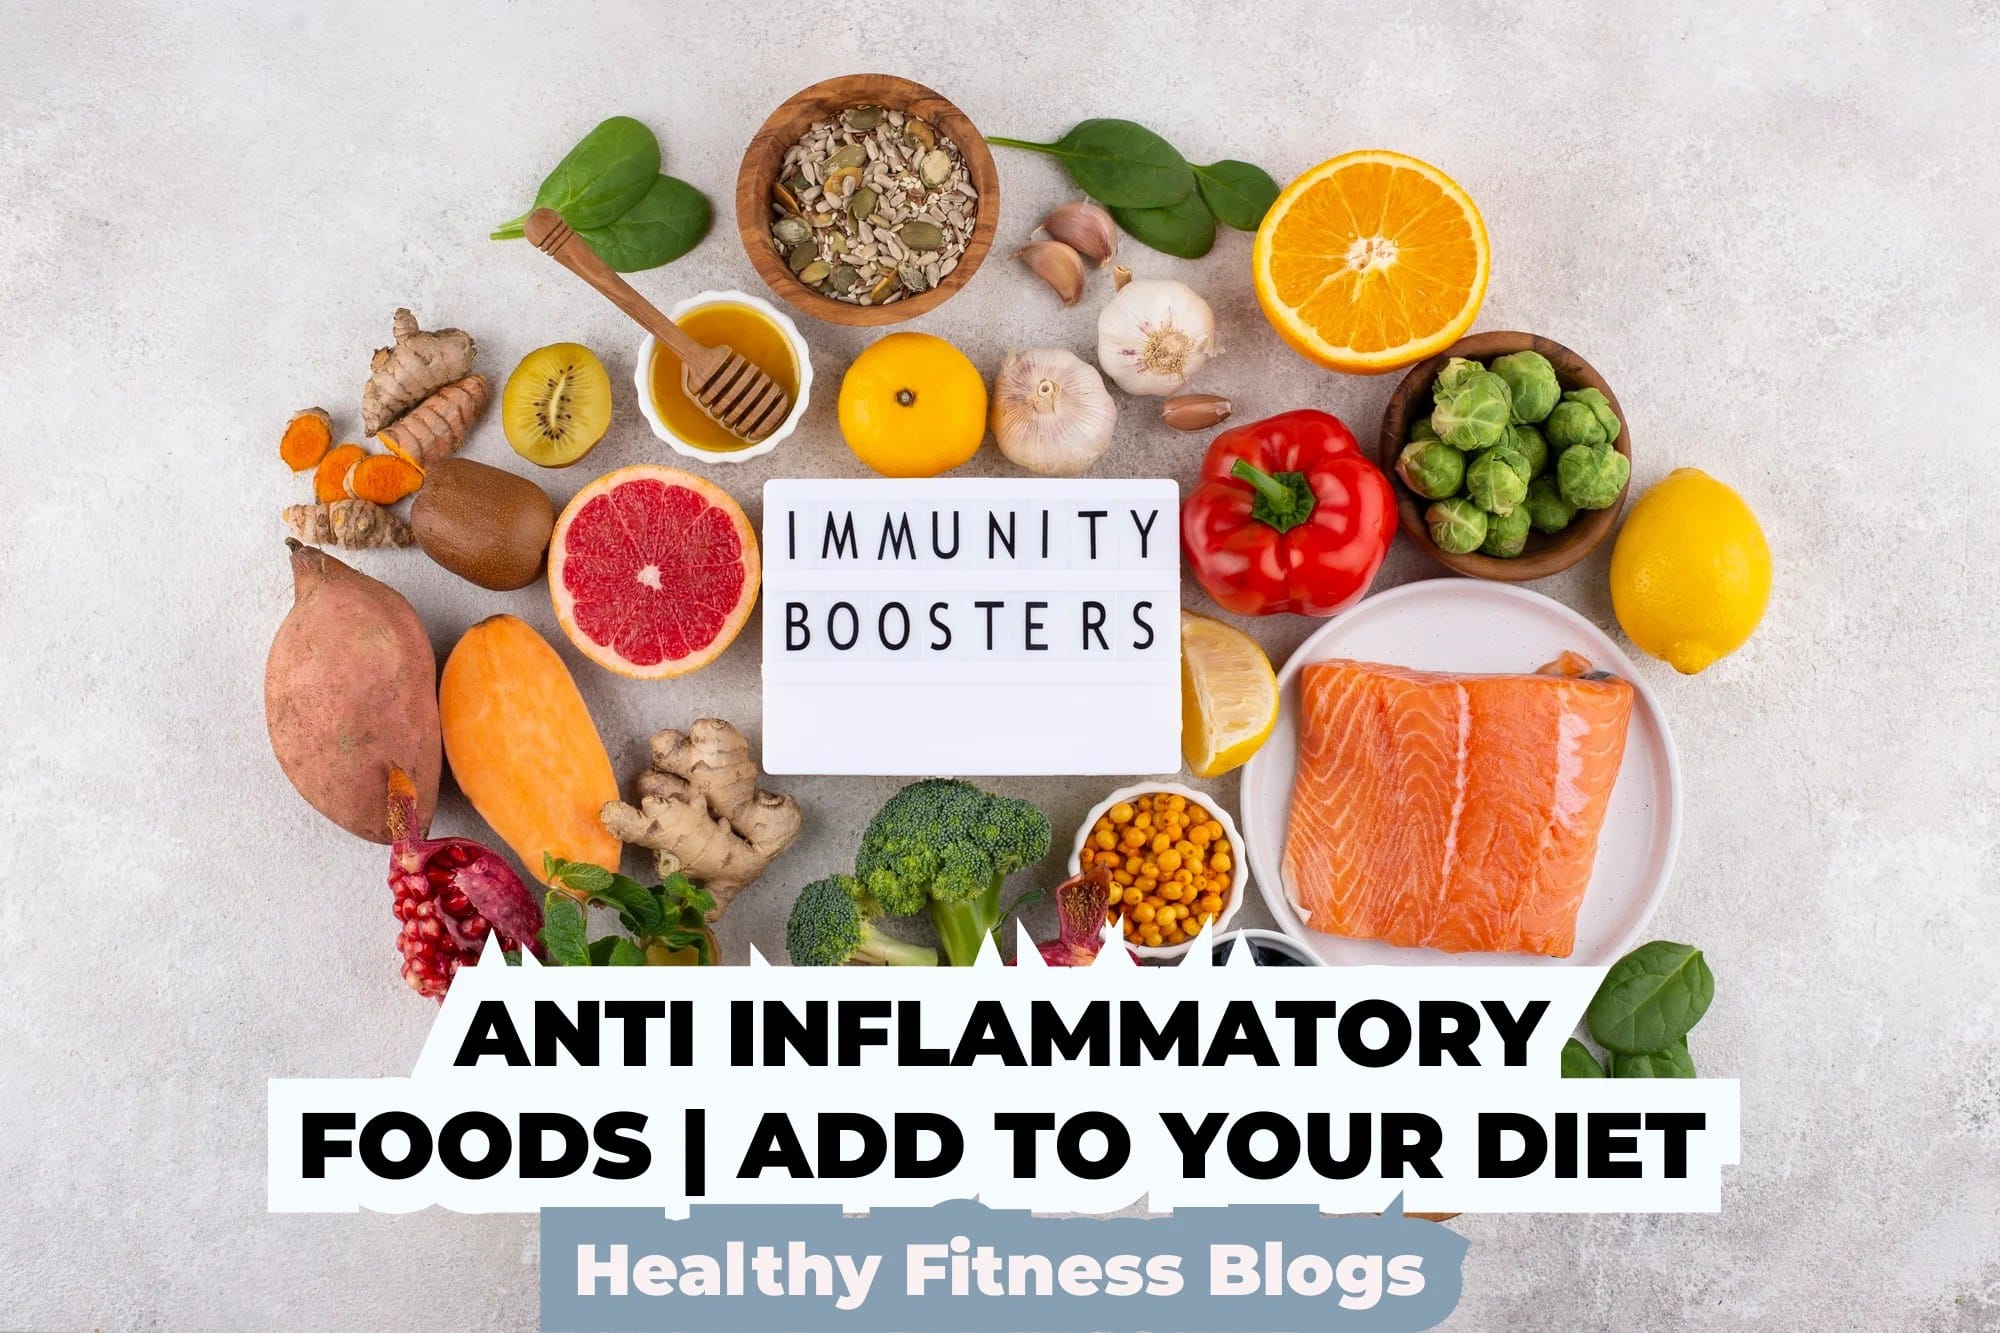 fruits and veggies on the surface that improve immunity - anti inflammatory foods